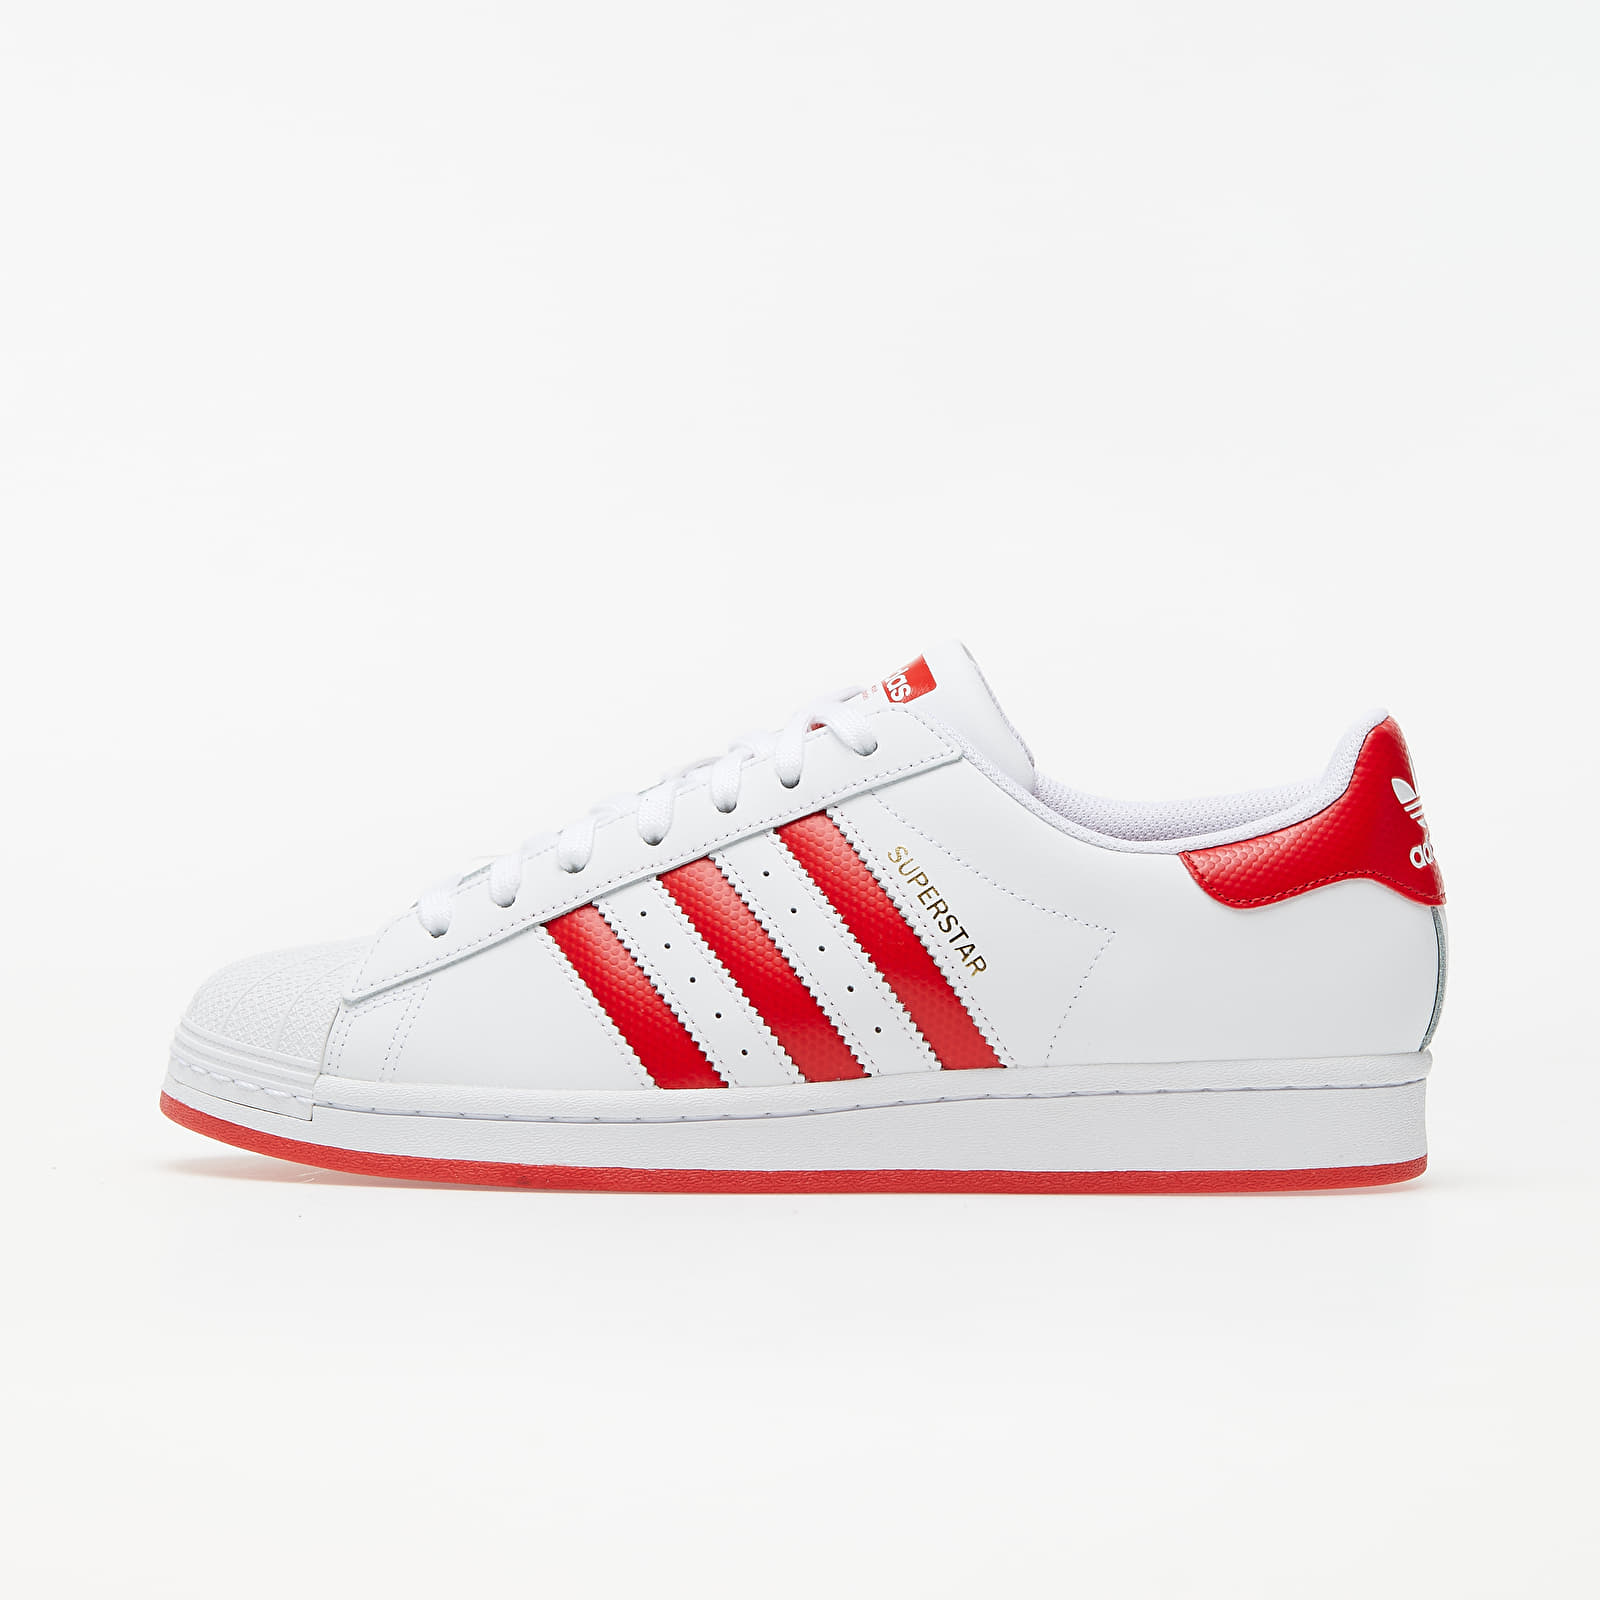 Chaussures et baskets homme adidas Superstar Ftw White/ Lust Red/ Gold Metalic